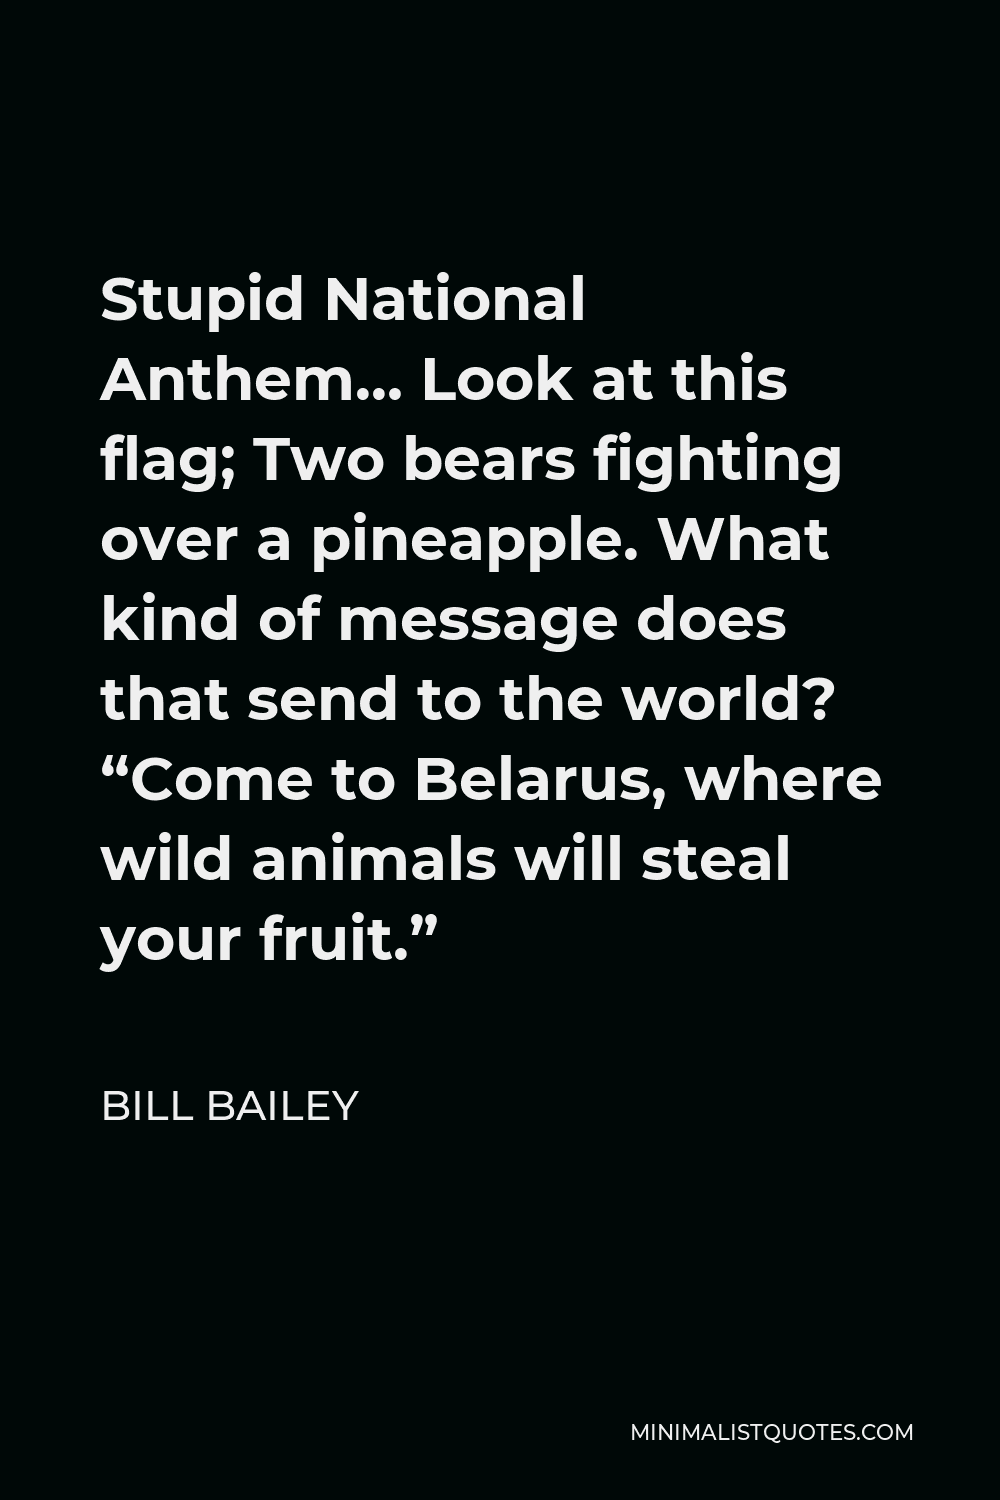 Bill Bailey Quote - Stupid National Anthem… Look at this flag; Two bears fighting over a pineapple. What kind of message does that send to the world? “Come to Belarus, where wild animals will steal your fruit.”